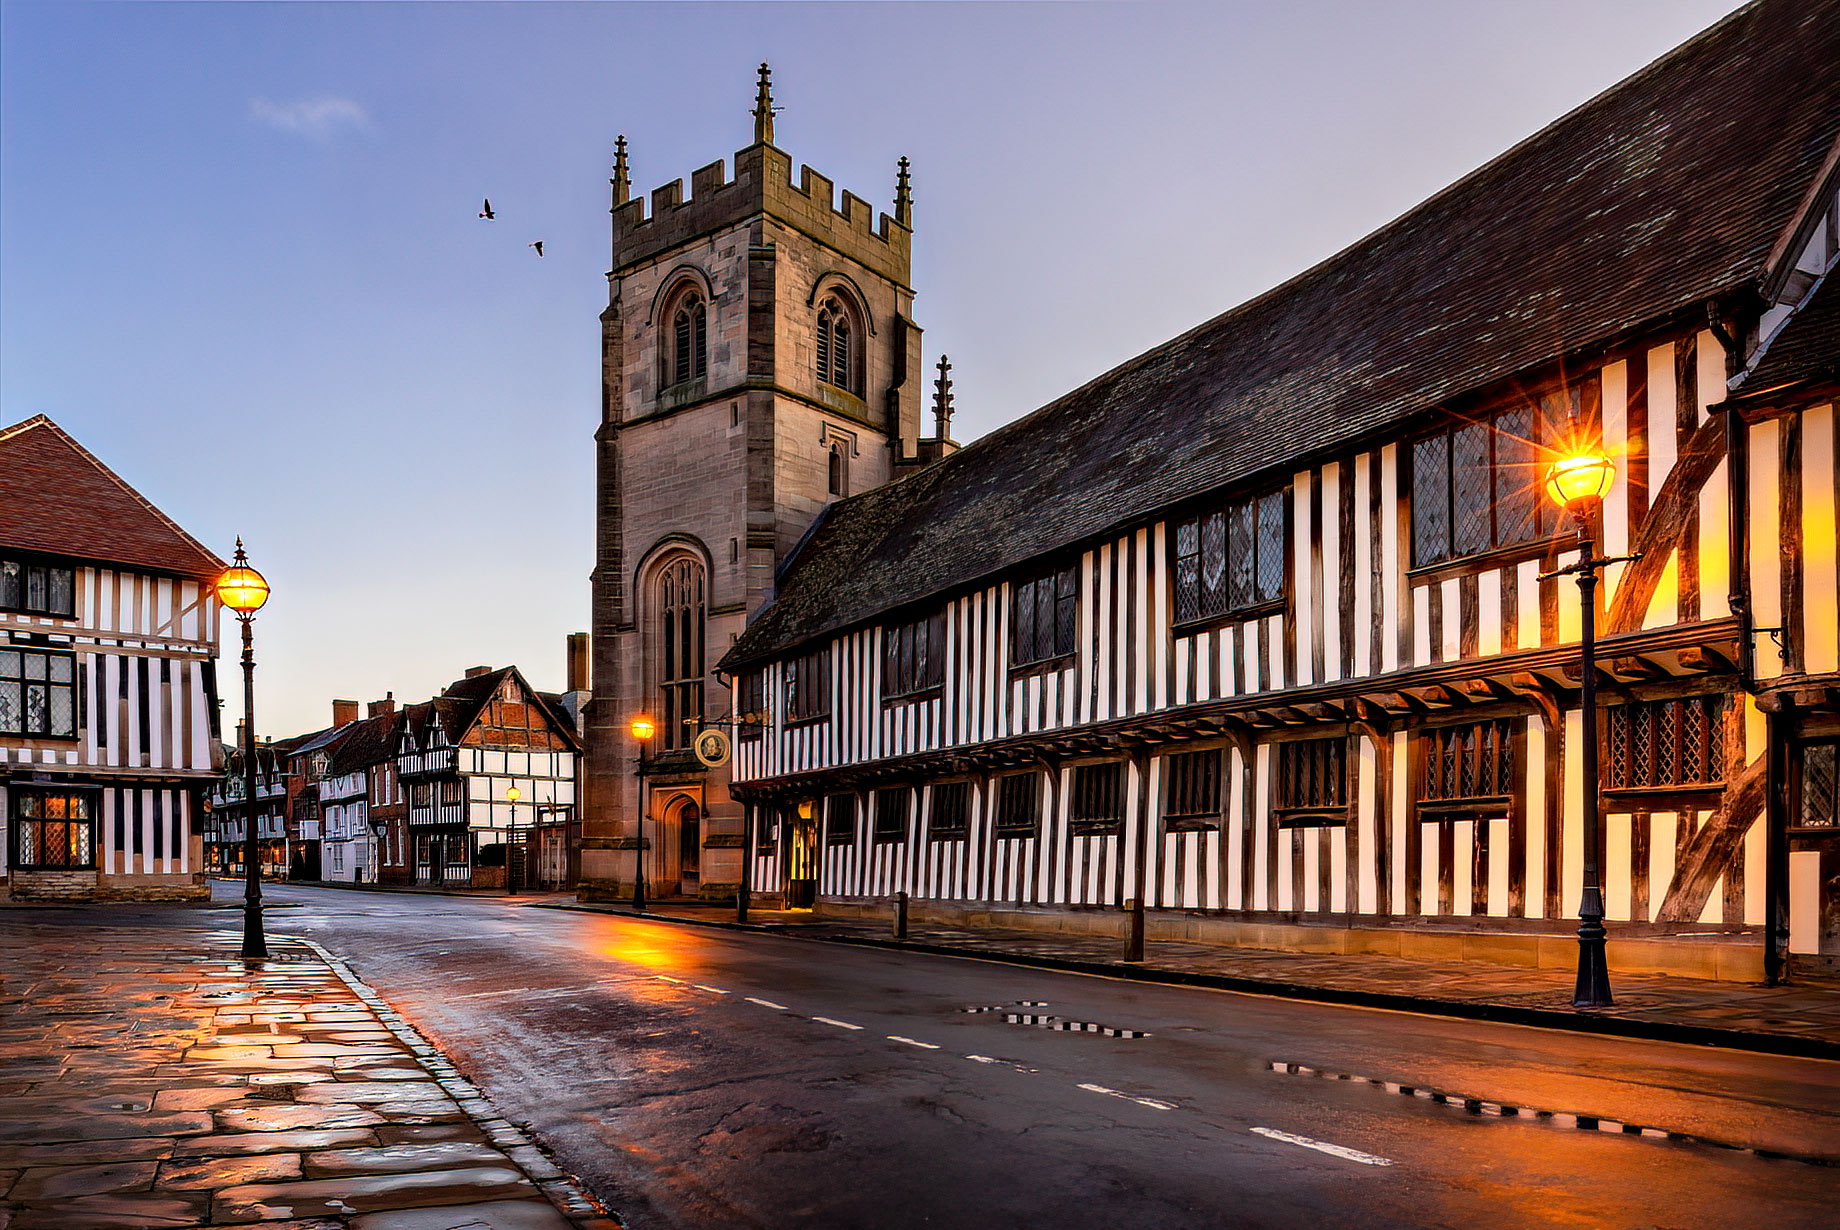 Stratford-upon-Avon, England - The Birthplace of William Shakespeare